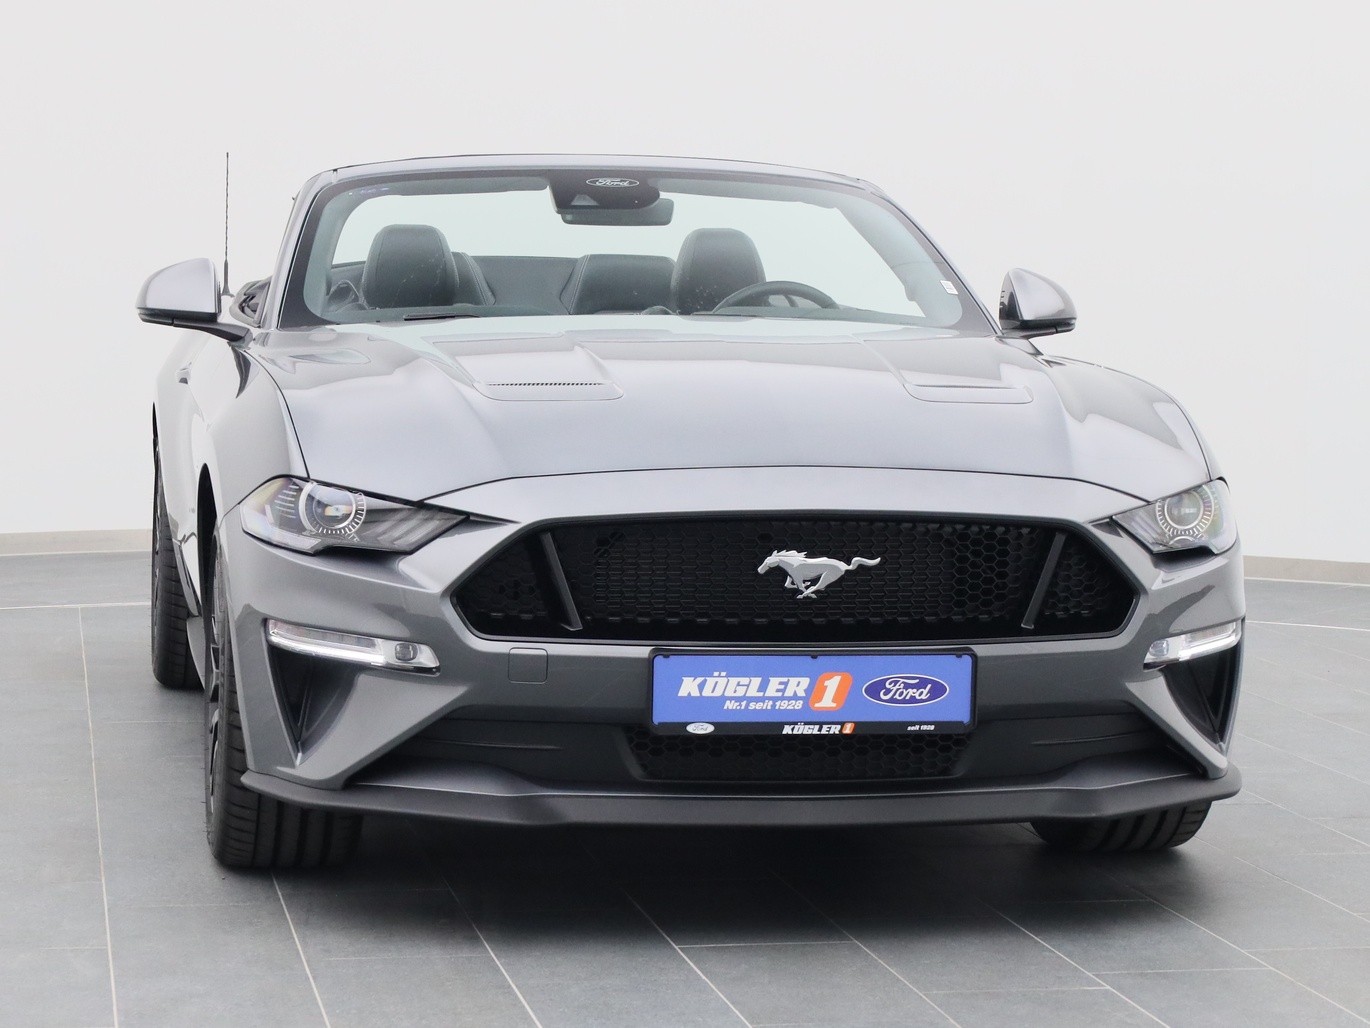  Ford Mustang GT Cabrio V8 450PS / Premium 2 / B&O in Carbonized Gray 